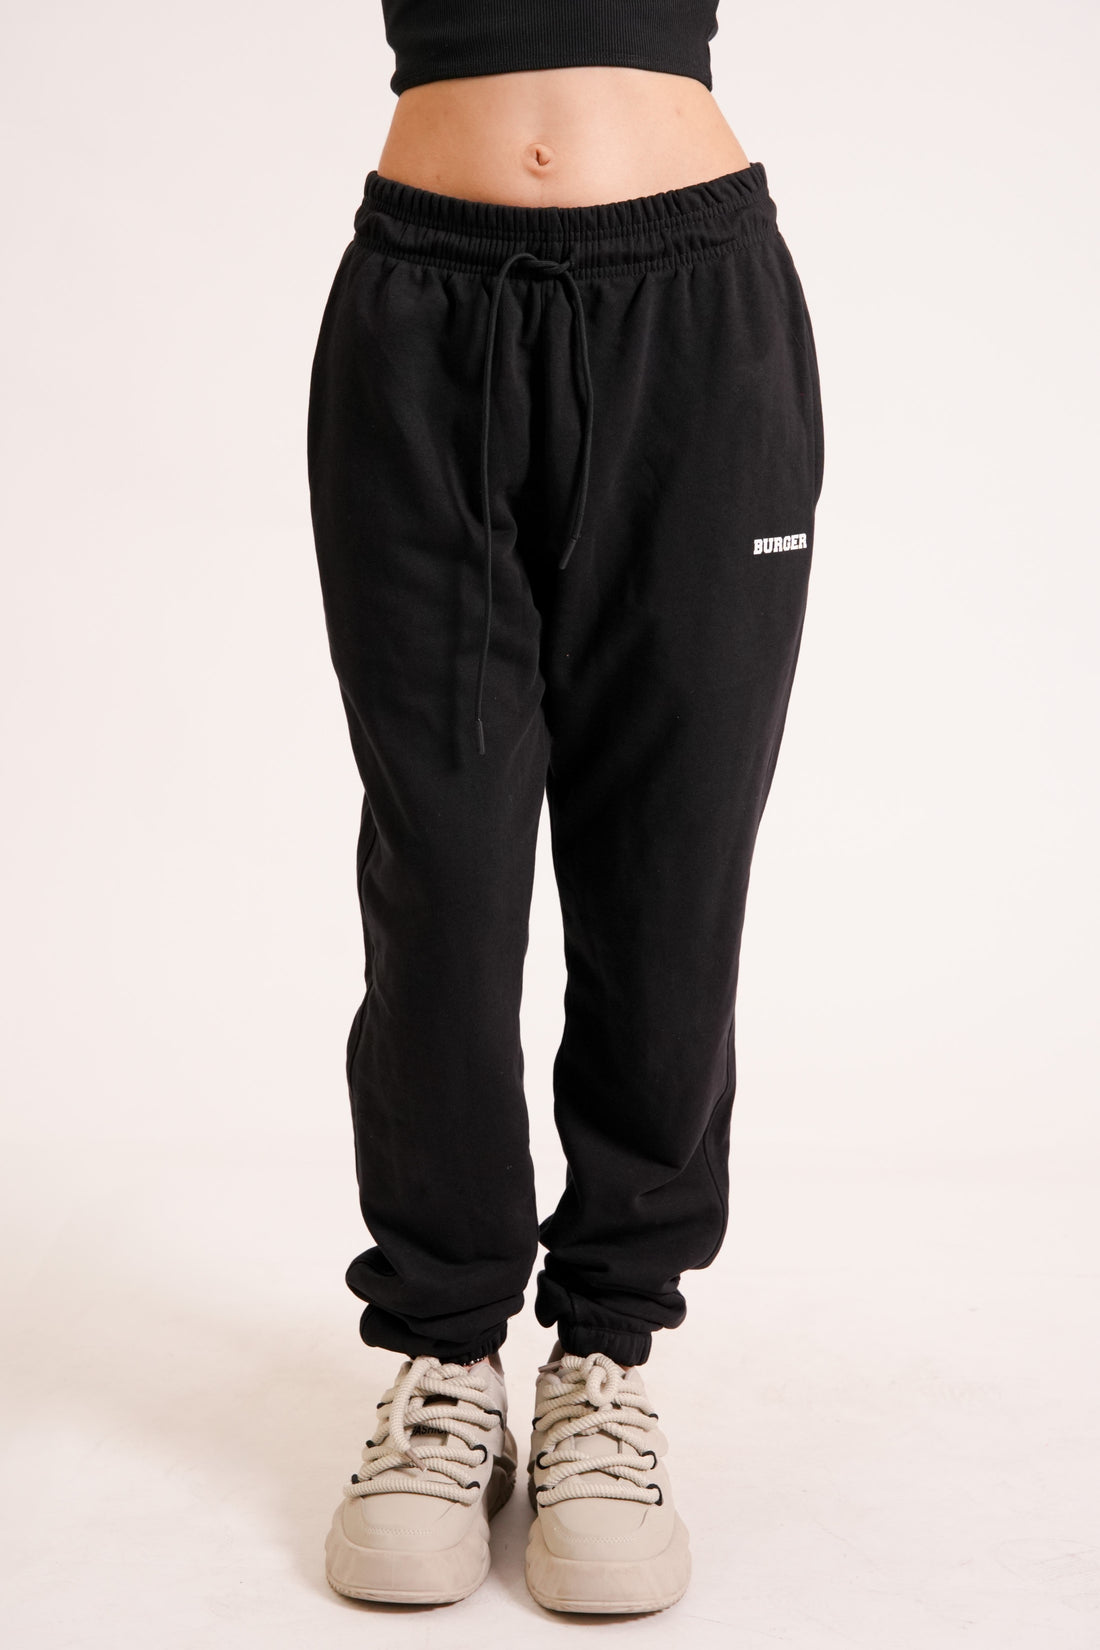 Gathered Jogger/Tracks For Men And Women